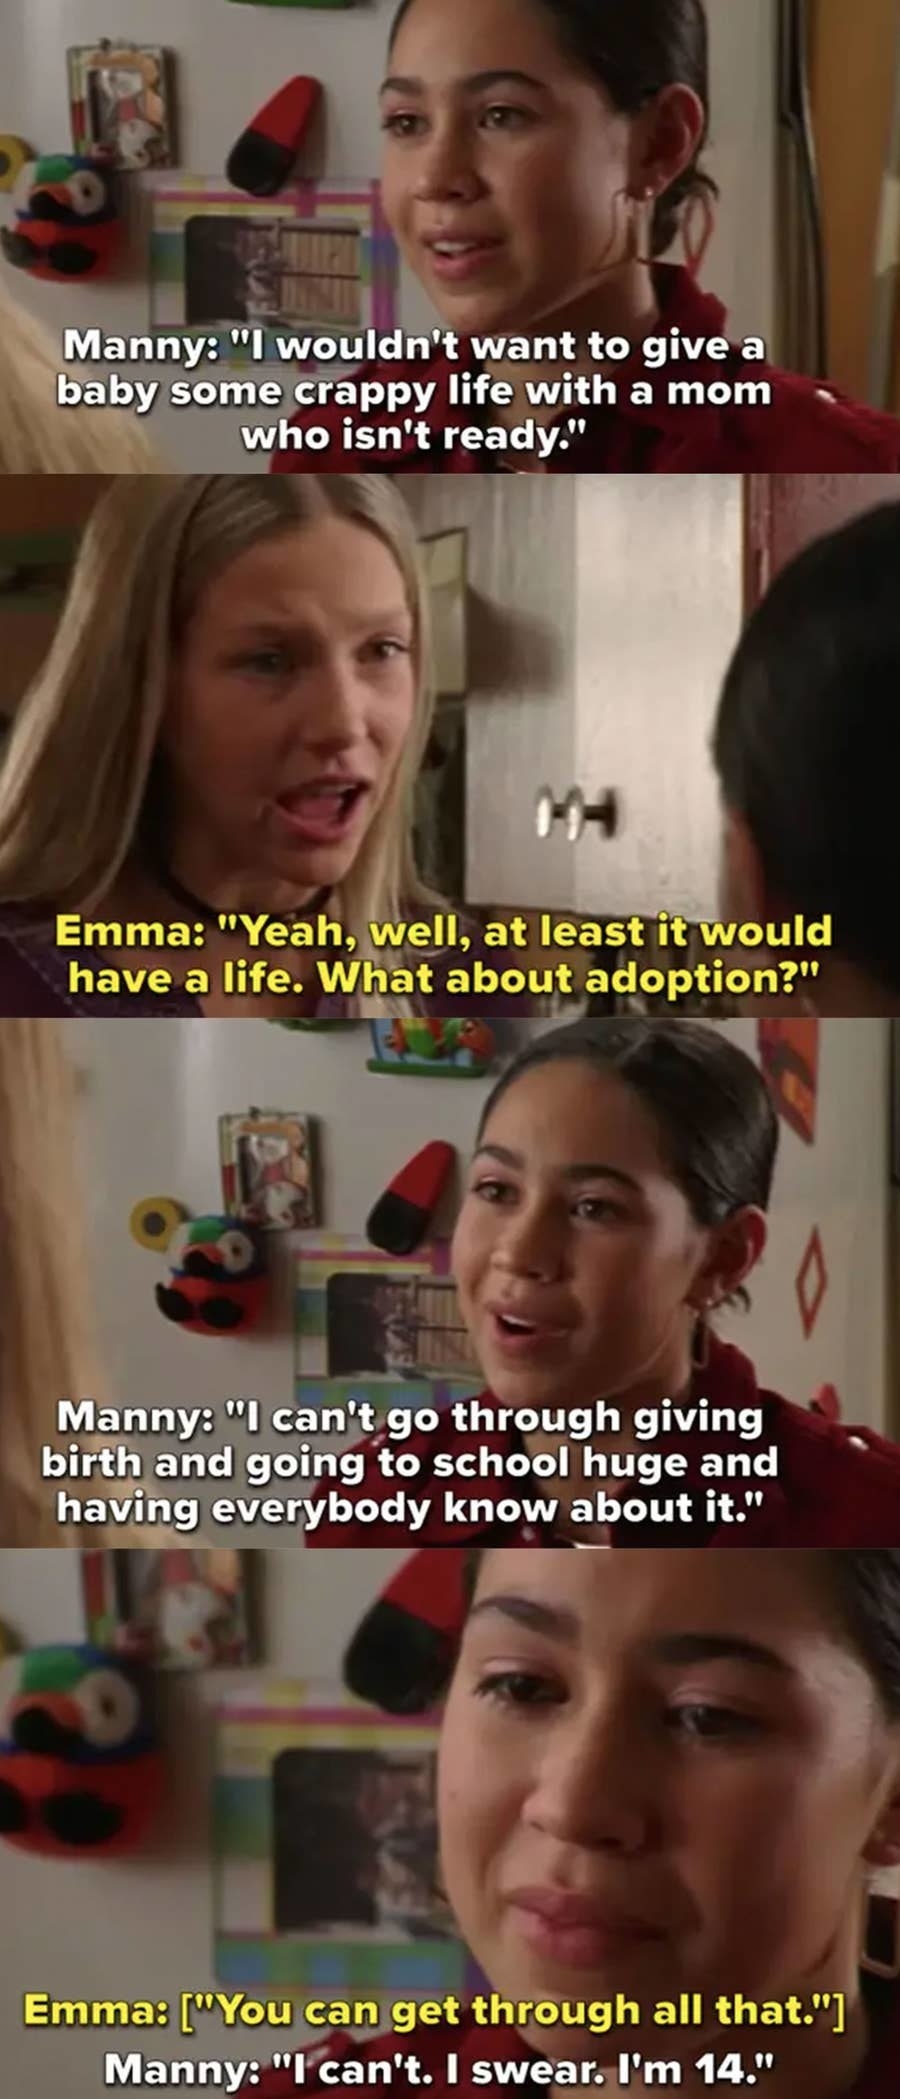 Manny tells Emma she wouldn&#x27;t want to give a baby a crappy life with a mom who isn&#x27;t ready and that she can&#x27;t go through giving birth and getting huge and having everyone at school know